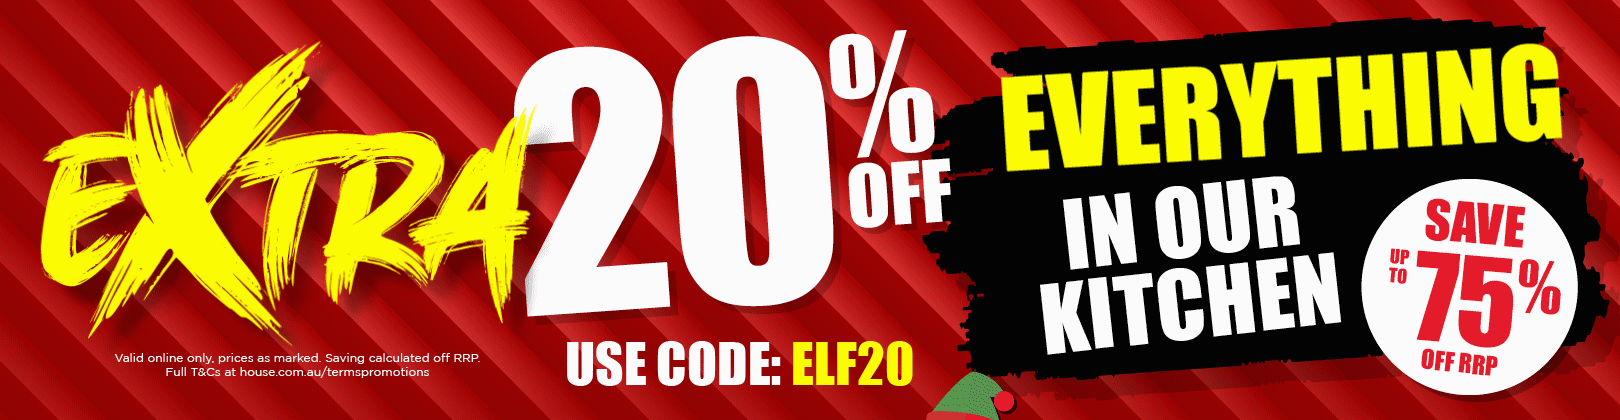 Take extra 25% OFF on everything with voucher code